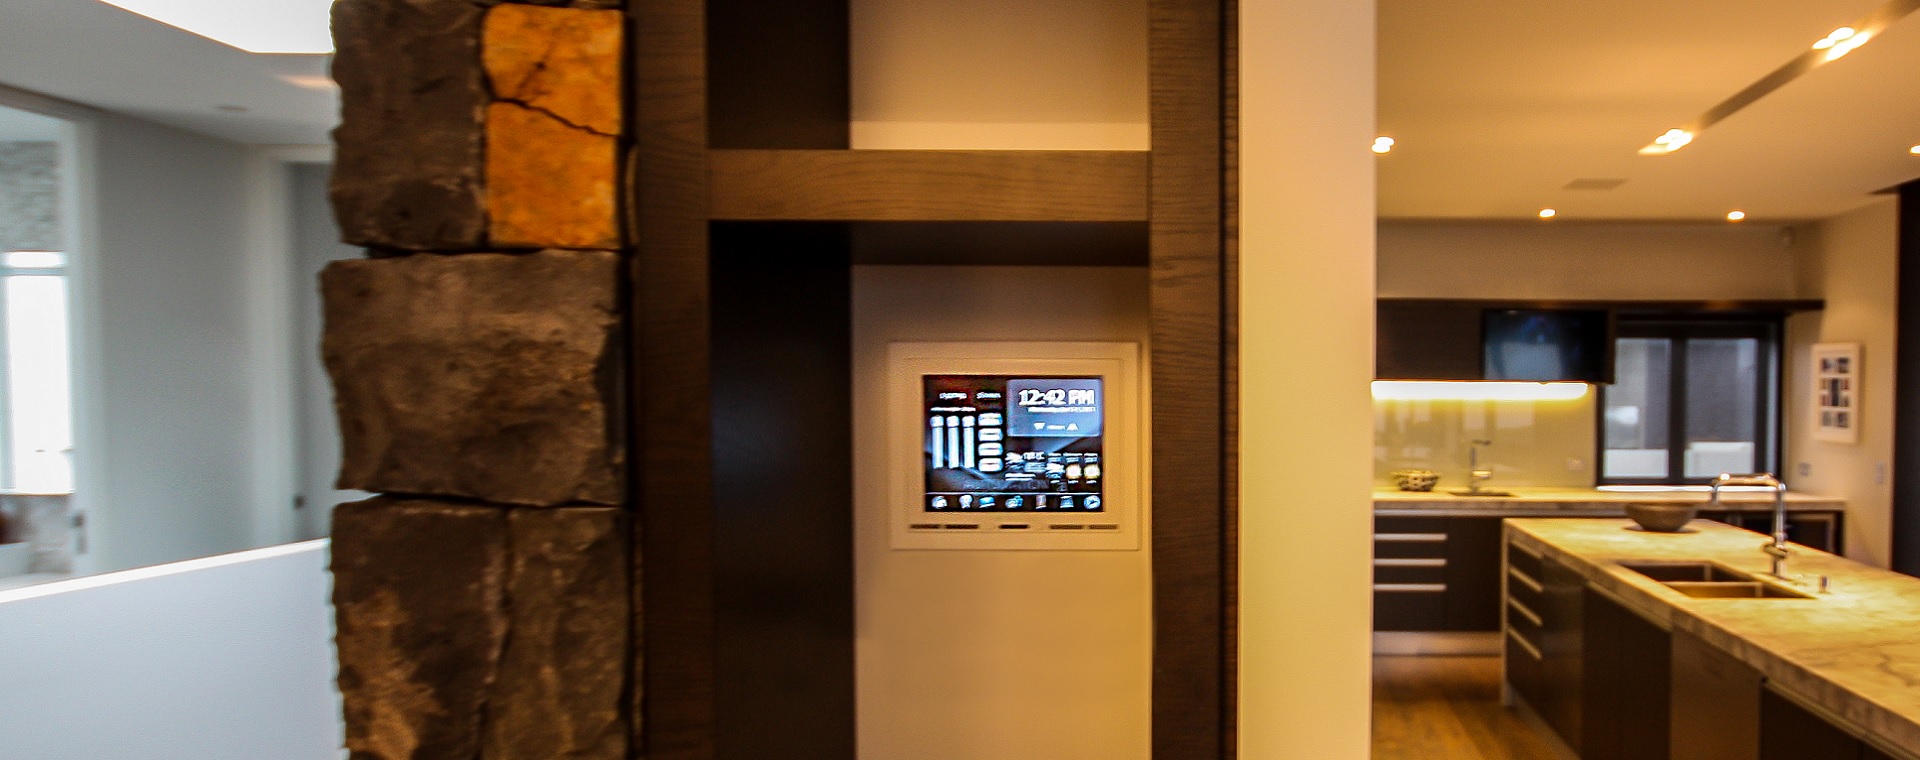 Discrete recessed touchscreen next to kitchen area for full home automation control